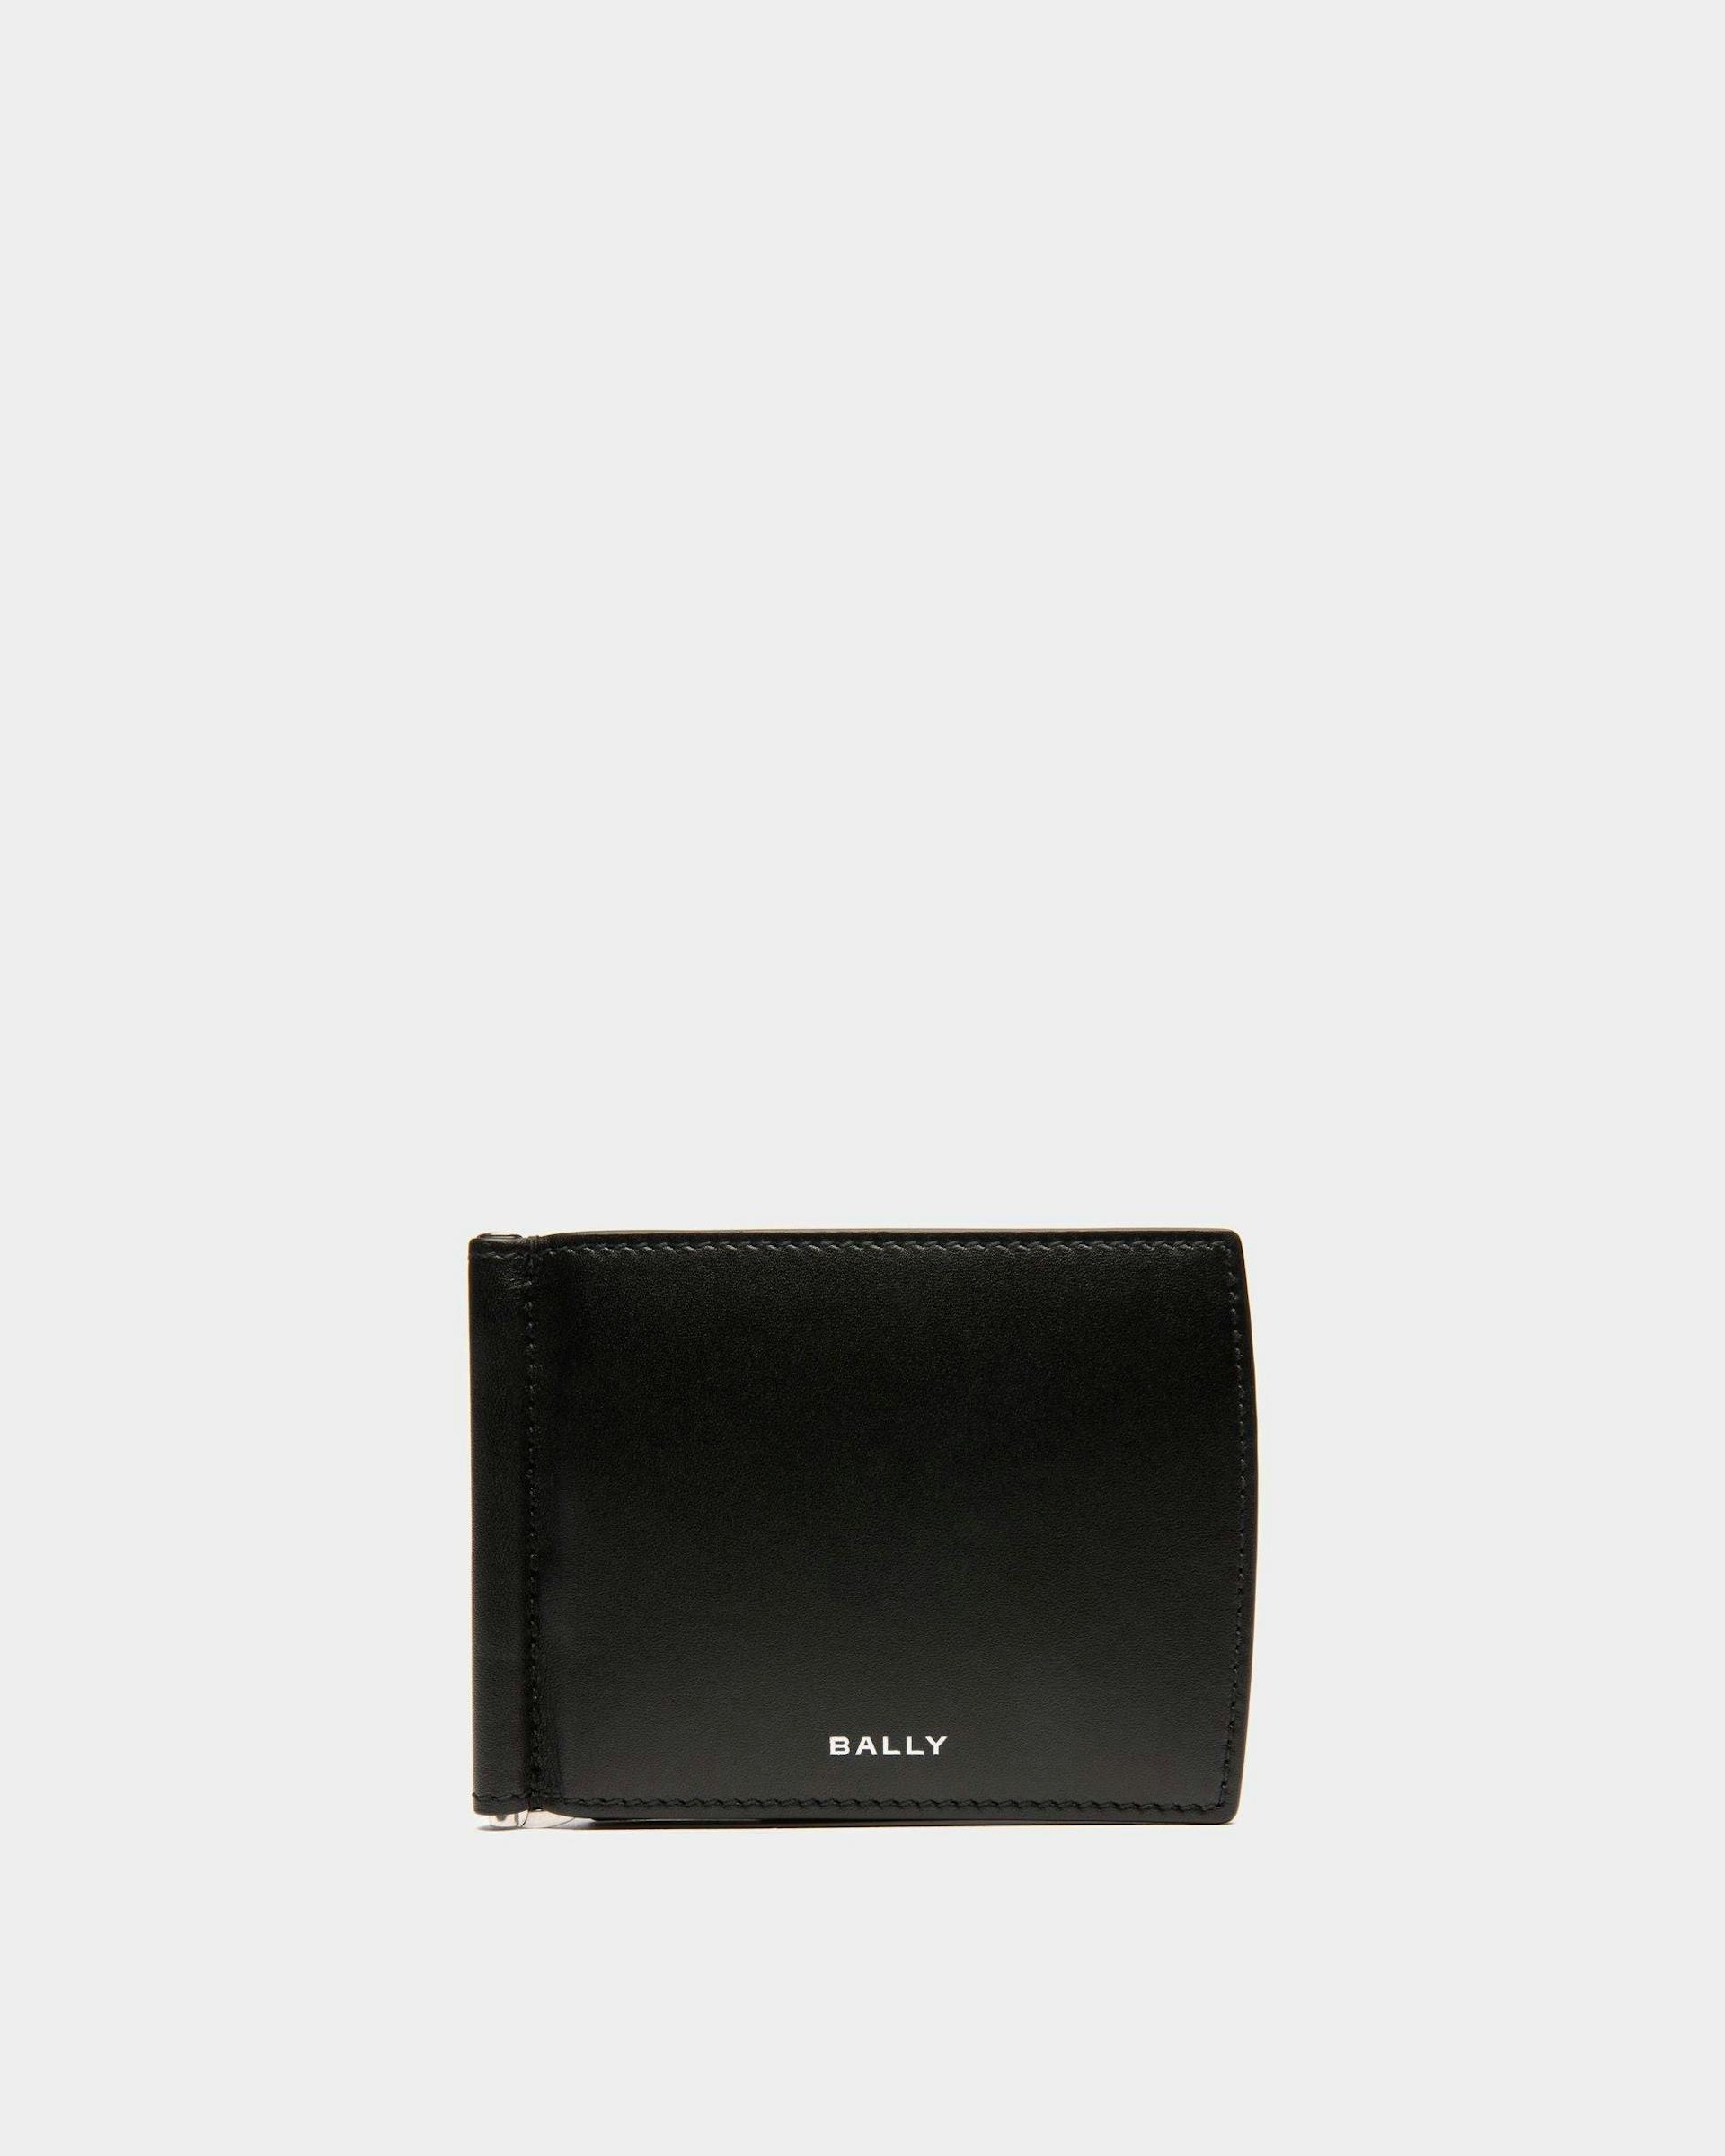 Men's Busy Bally Bifold Wallet in Black Leather | Bally | Still Life Front